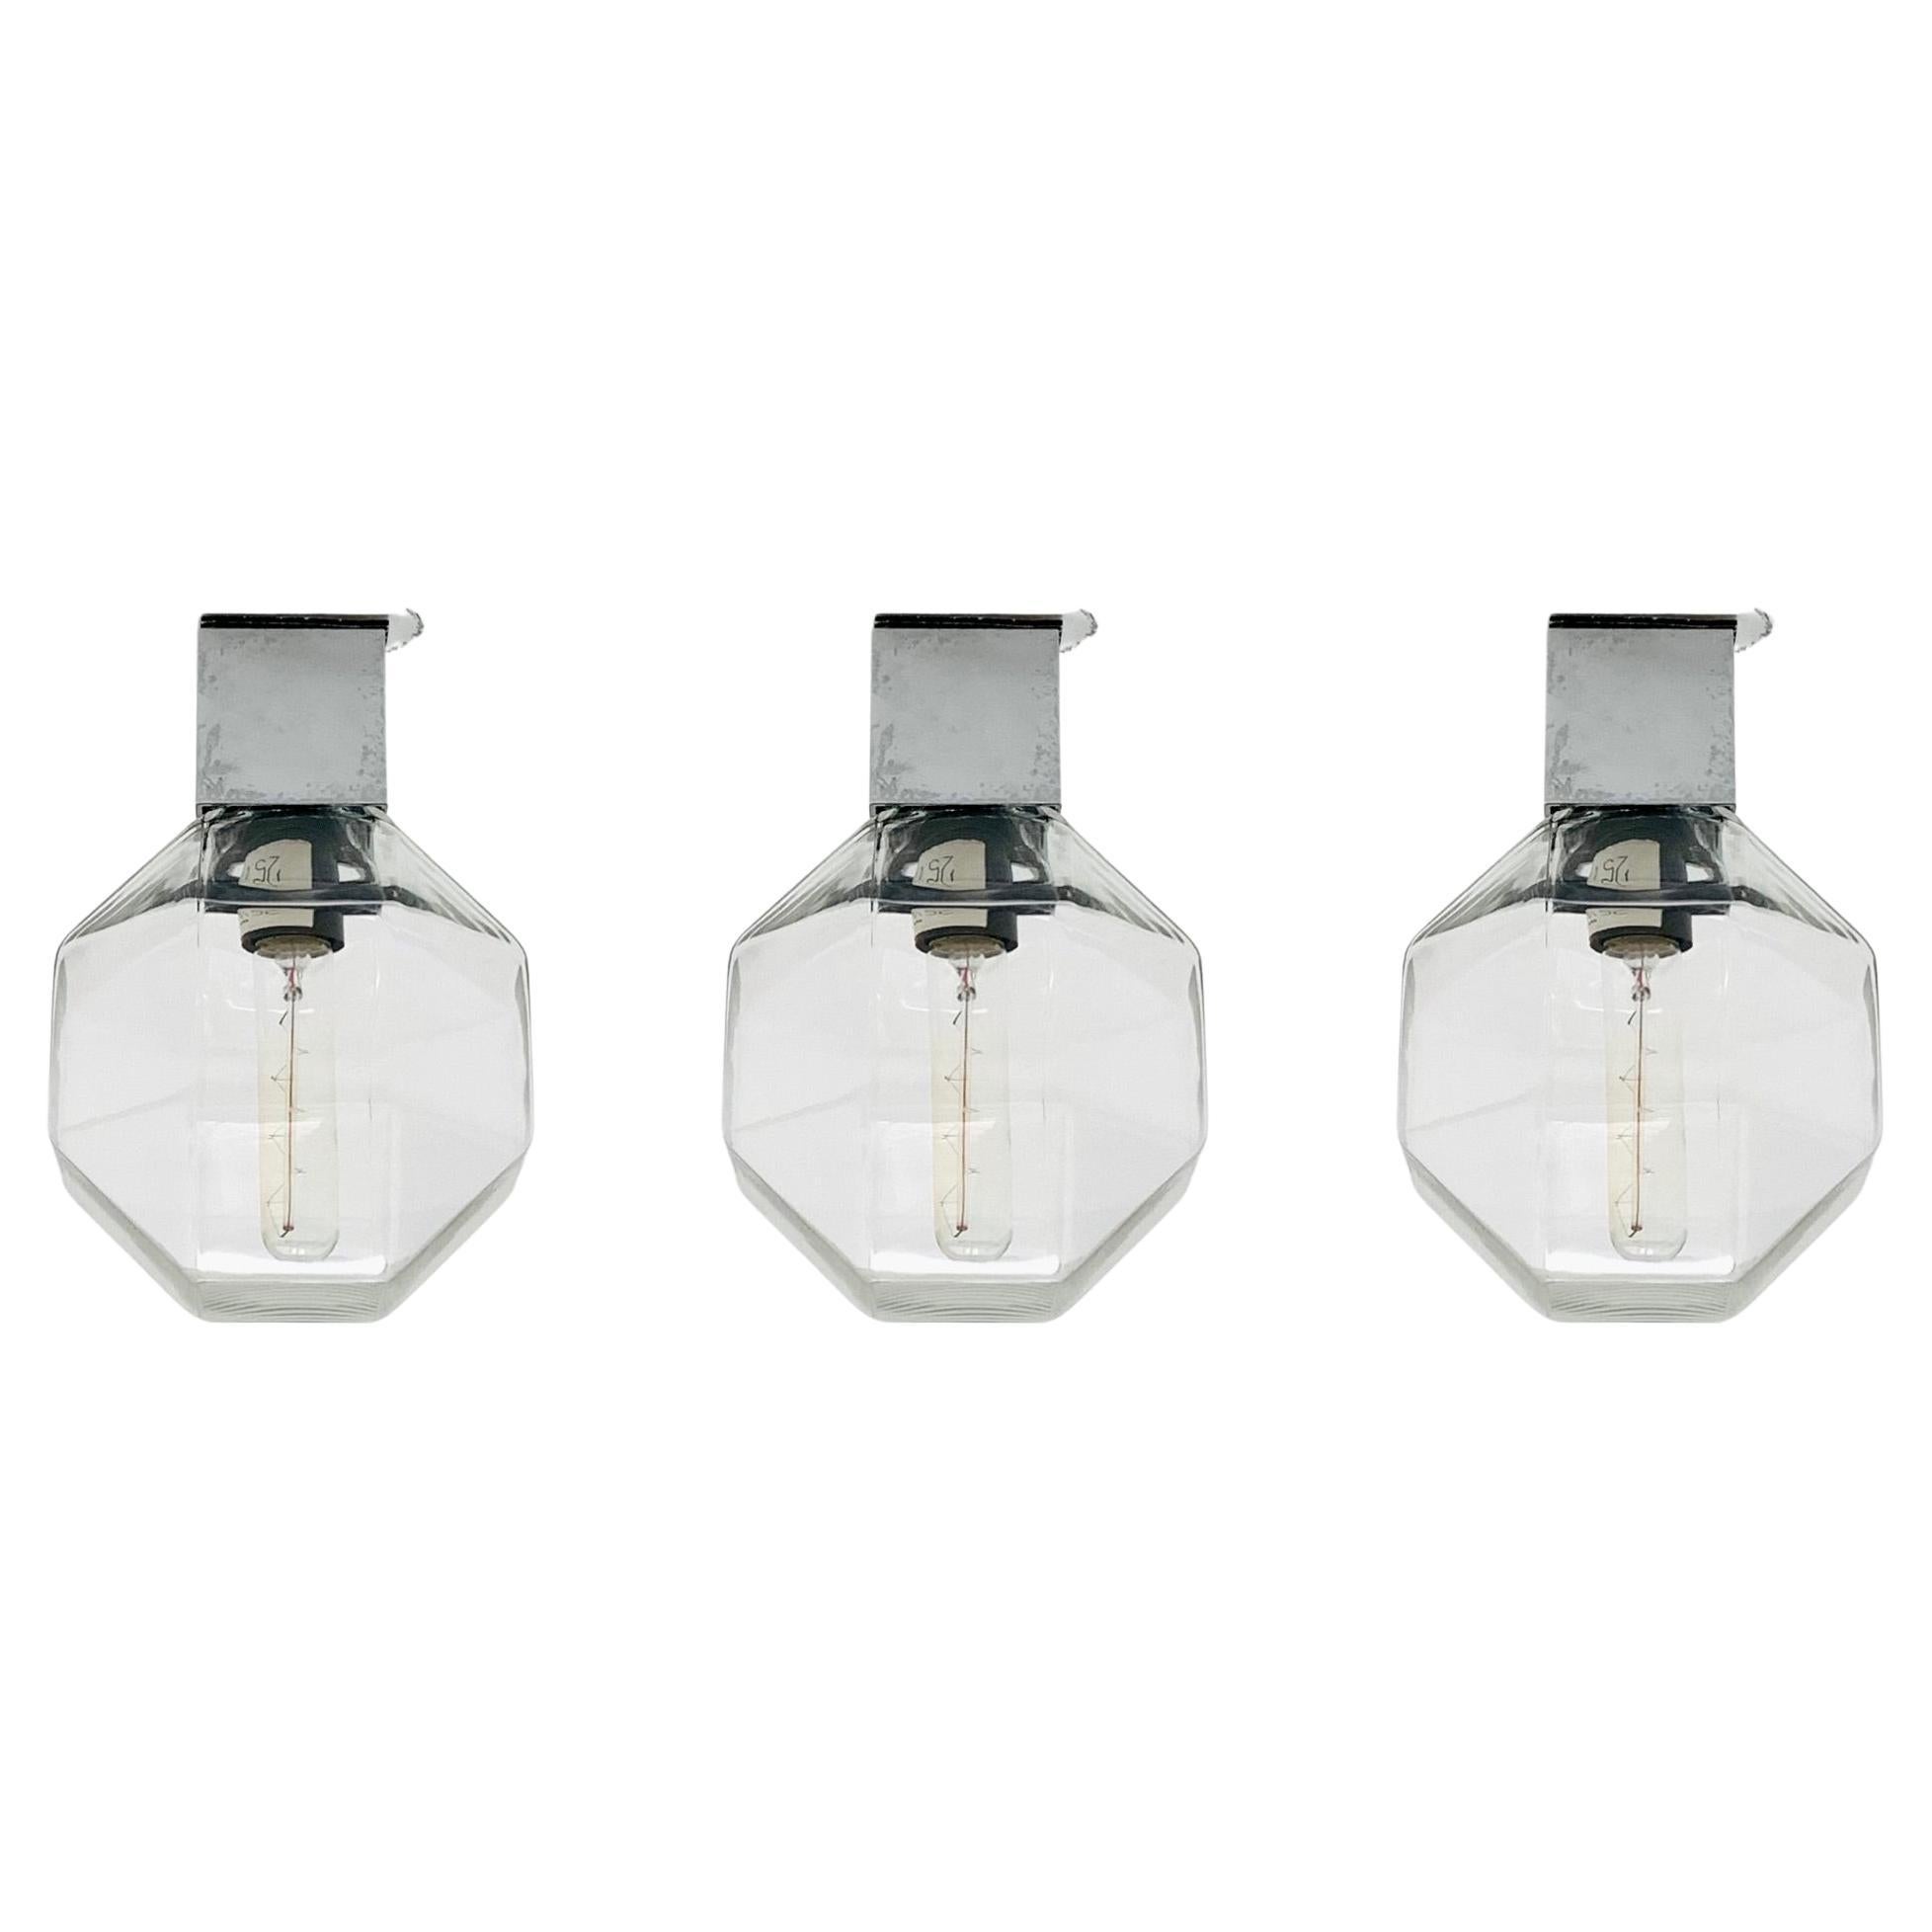 Set of 3 1970s Modernist Wall or Ceiling Lamps by Motoko Ishii for Staff